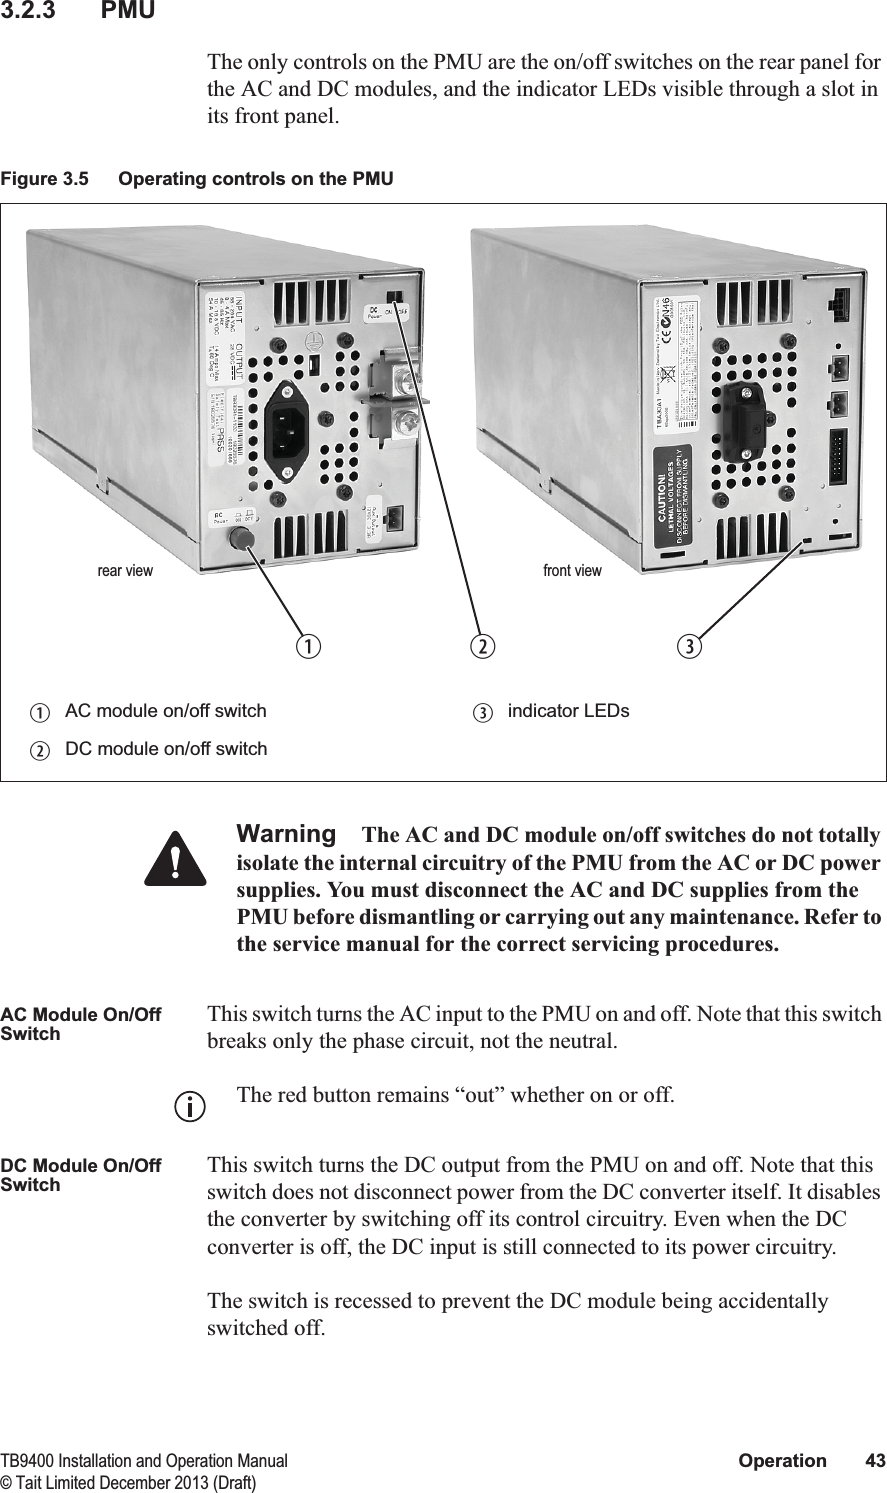  TB9400 Installation and Operation Manual Operation 43© Tait Limited December 2013 (Draft)3.2.3 PMUThe only controls on the PMU are the on/off switches on the rear panel for the AC and DC modules, and the indicator LEDs visible through a slot in its front panel.Warning The AC and DC module on/off switches do not totally isolate the internal circuitry of the PMU from the AC or DC power supplies. You must disconnect the AC and DC supplies from the PMU before dismantling or carrying out any maintenance. Refer to the service manual for the correct servicing procedures.AC Module On/Off SwitchThis switch turns the AC input to the PMU on and off. Note that this switch breaks only the phase circuit, not the neutral.The red button remains “out” whether on or off.DC Module On/Off SwitchThis switch turns the DC output from the PMU on and off. Note that this switch does not disconnect power from the DC converter itself. It disables the converter by switching off its control circuitry. Even when the DC converter is off, the DC input is still connected to its power circuitry. The switch is recessed to prevent the DC module being accidentally switched off. Figure 3.5 Operating controls on the PMUbAC module on/off switch dindicator LEDscDC module on/off switchbcrear viewdfront view